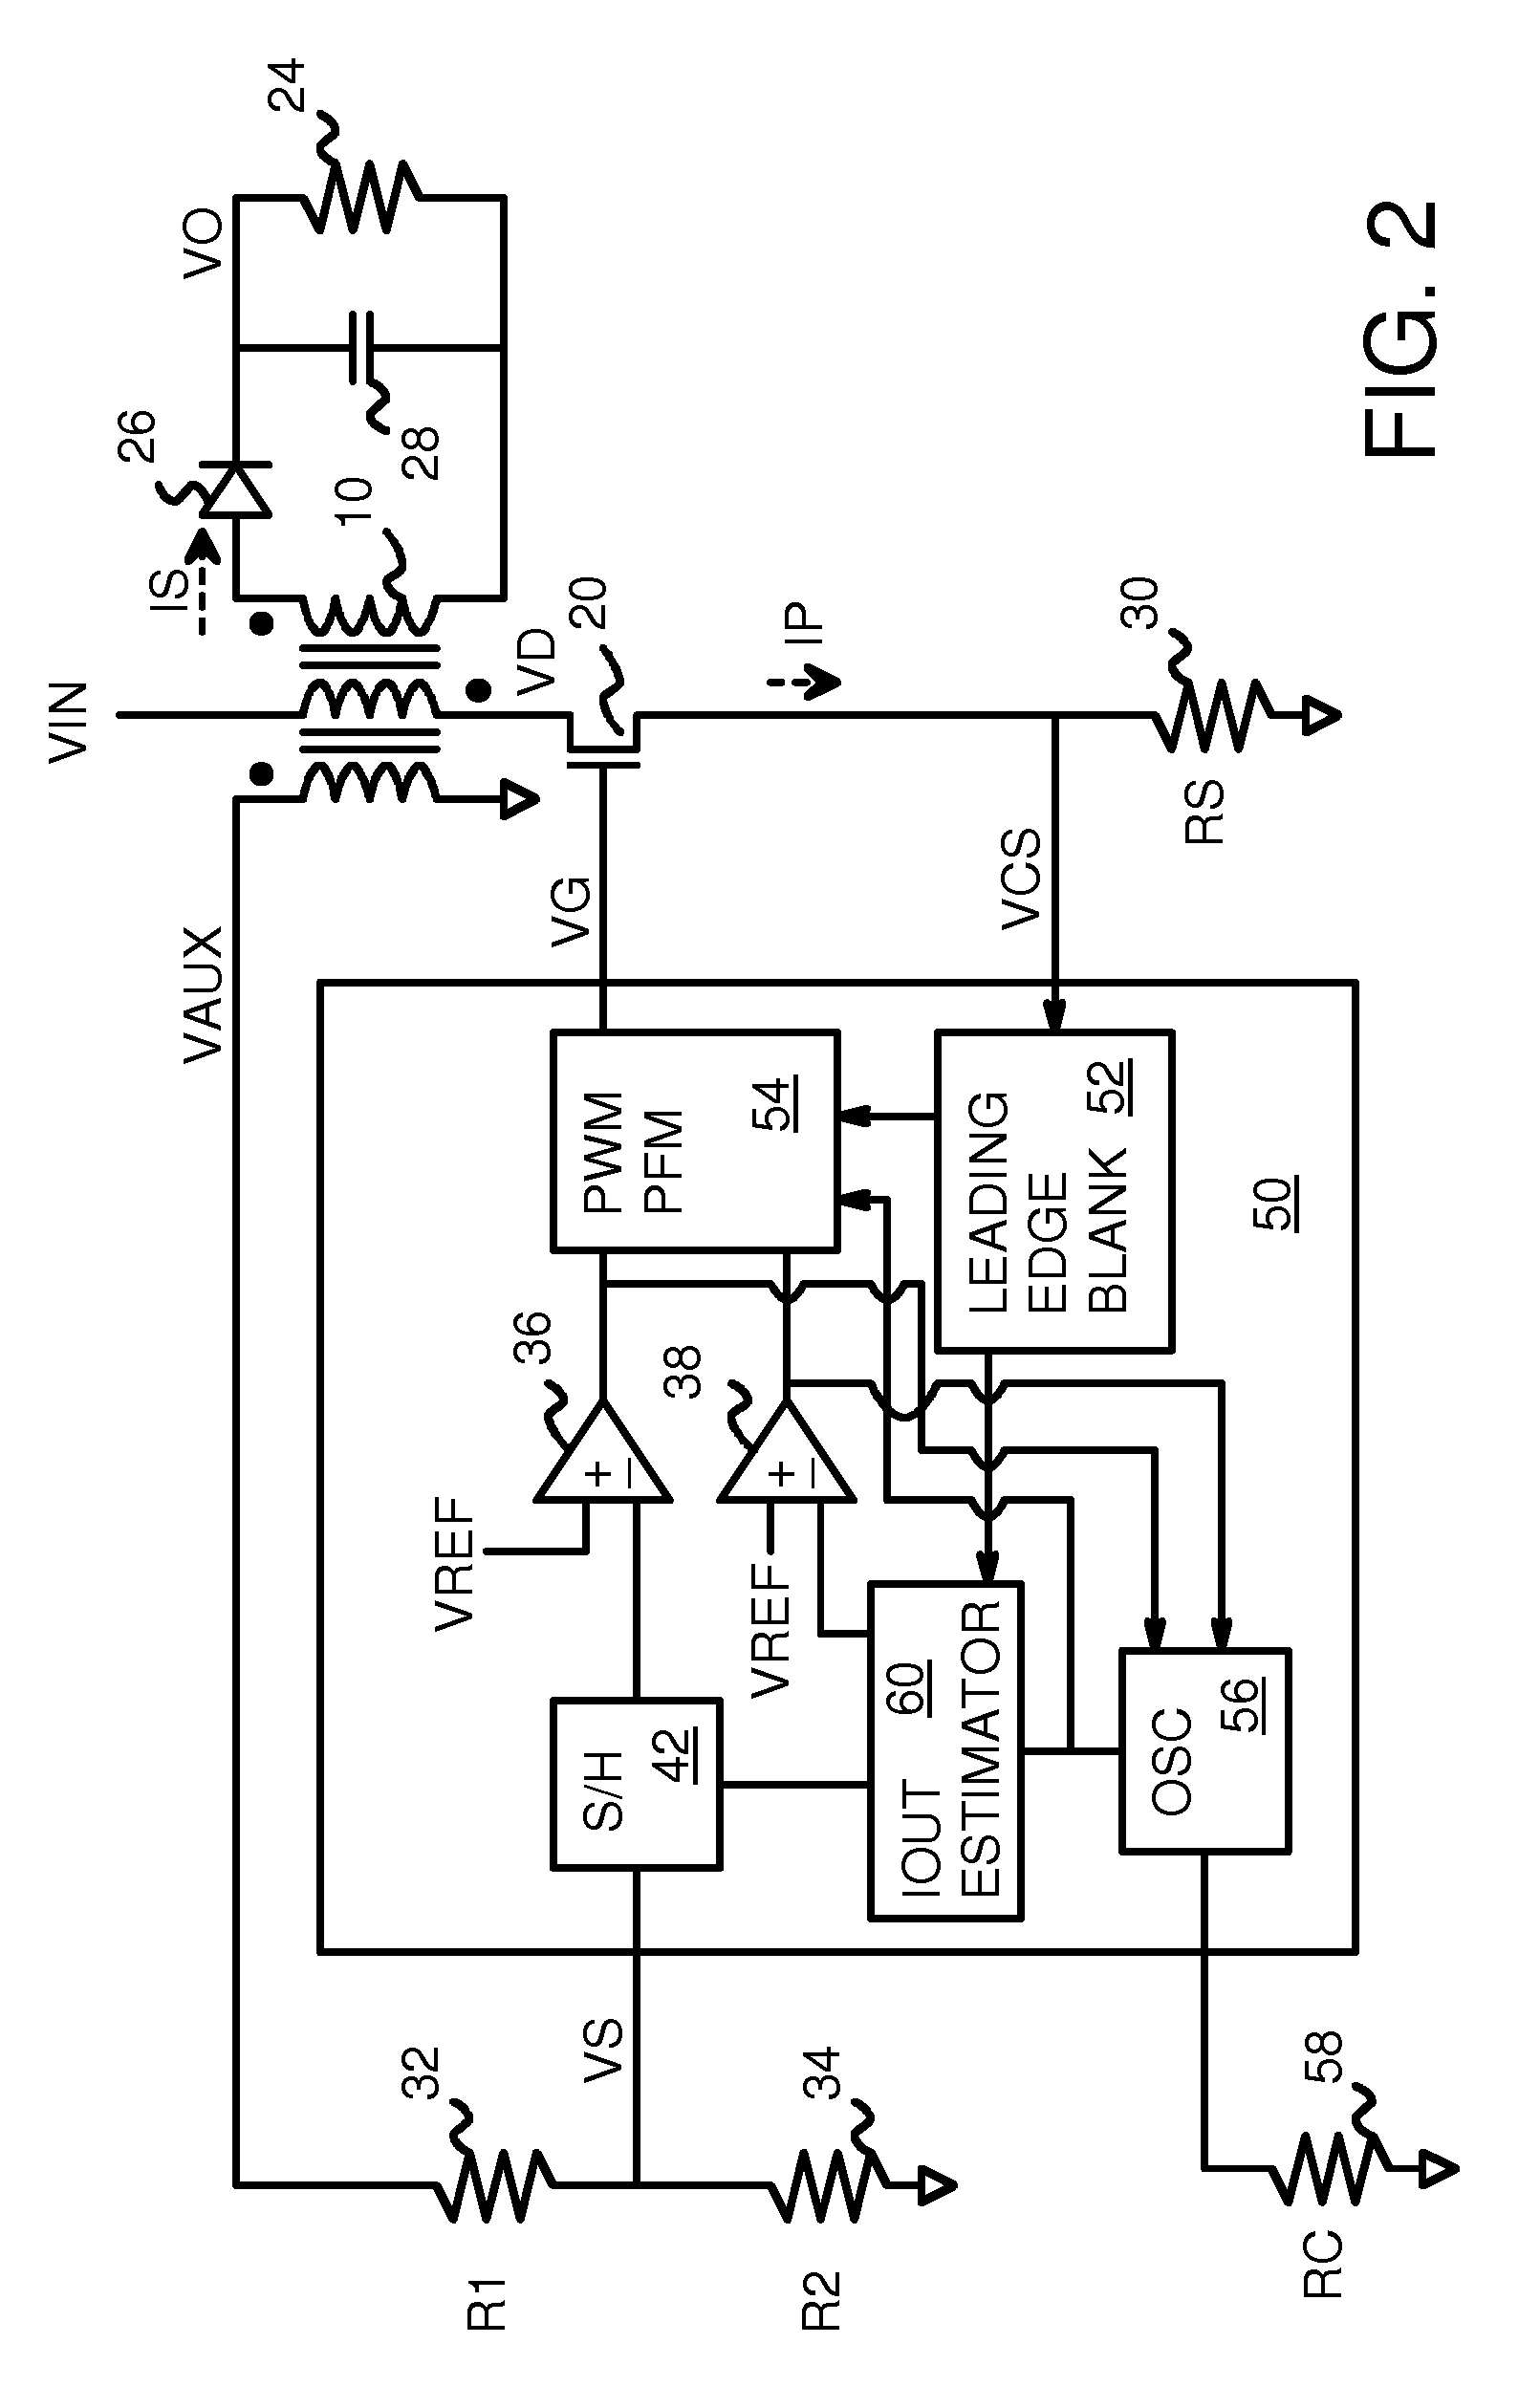 Output current estimation for an isolated flyback converter with variable switching frequency control and duty cycle adjustment for both PWM and PFM modes